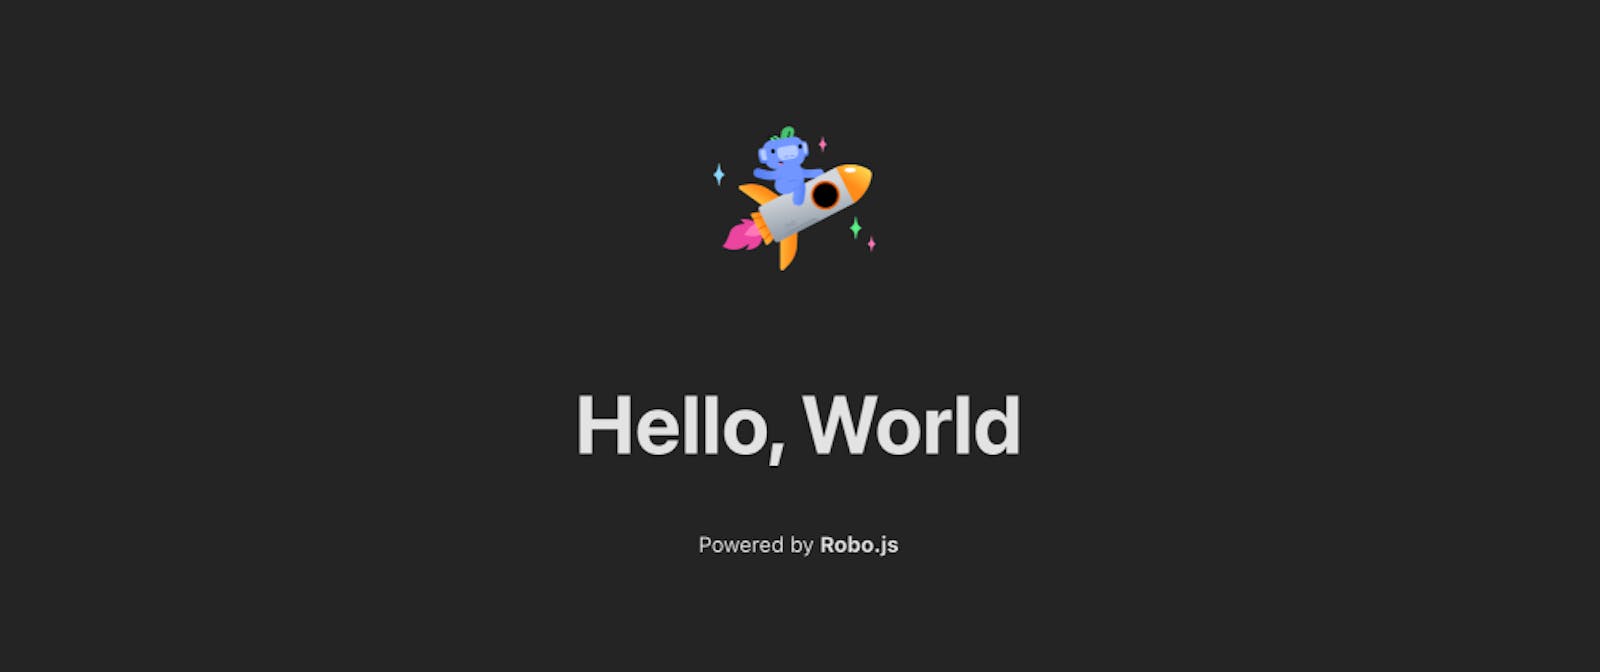 How to build a Discord Activity easily with Robo.js